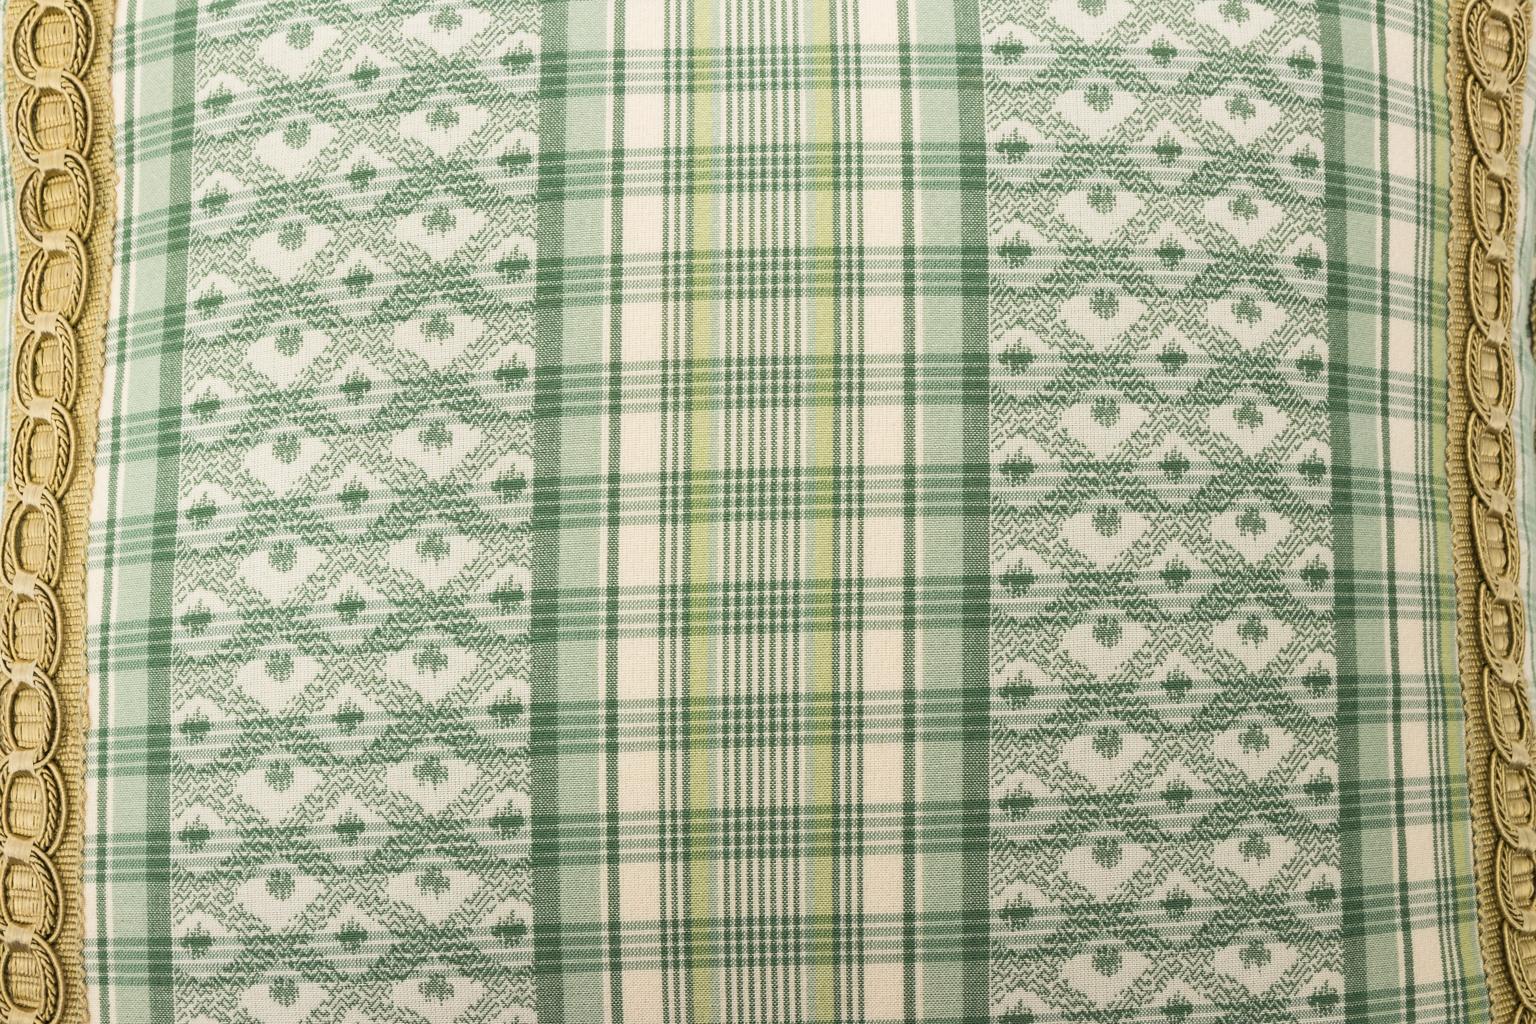 Decorative Green and White Pillows 3